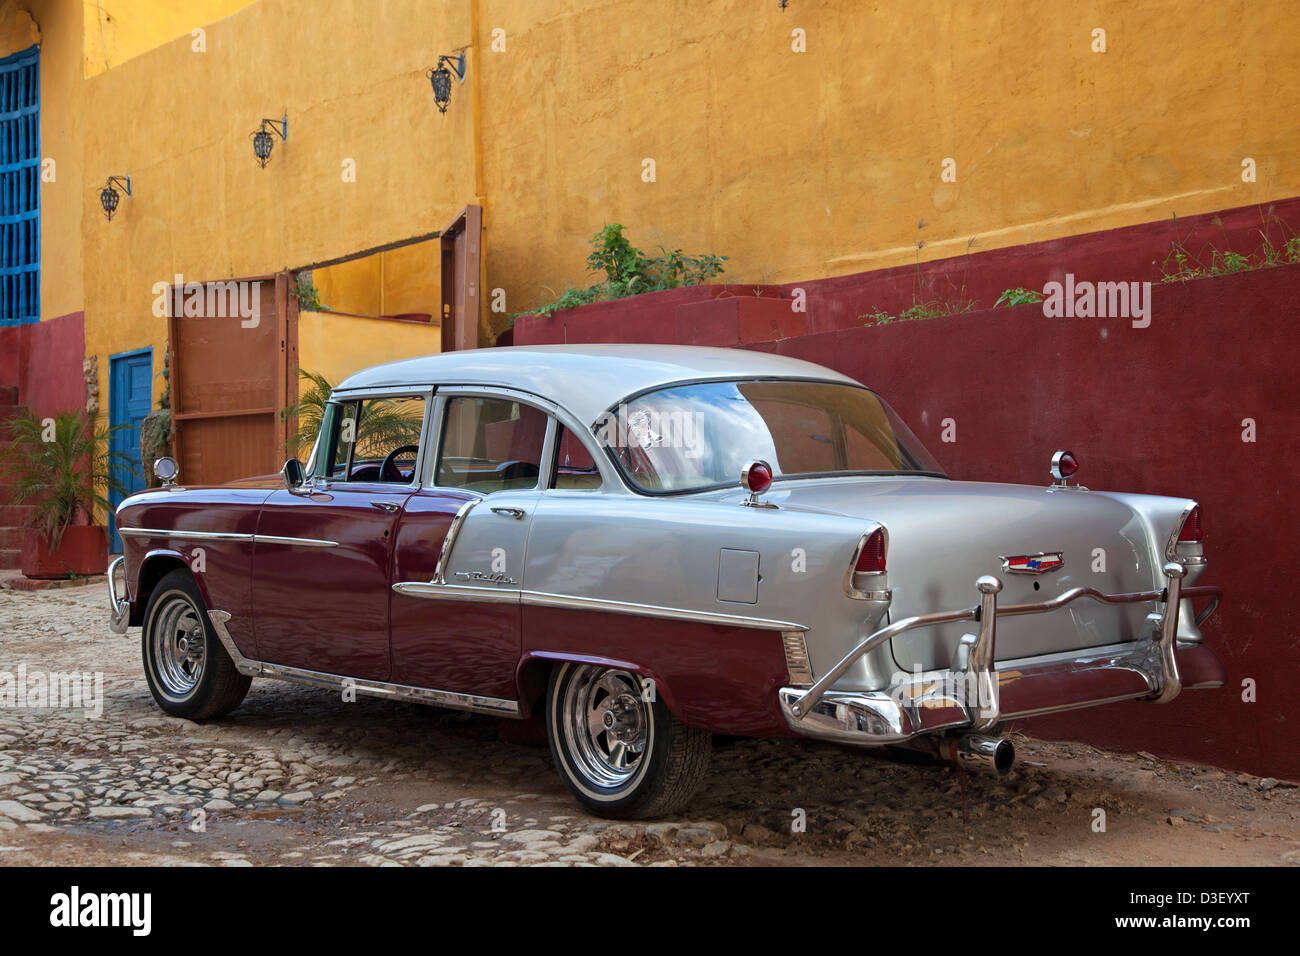 Pastel coloured house and old 1950s vintage American Chevrolet Bel Air car / Yank tank in Trinidad, Cuba, Caribbean Stock Photo